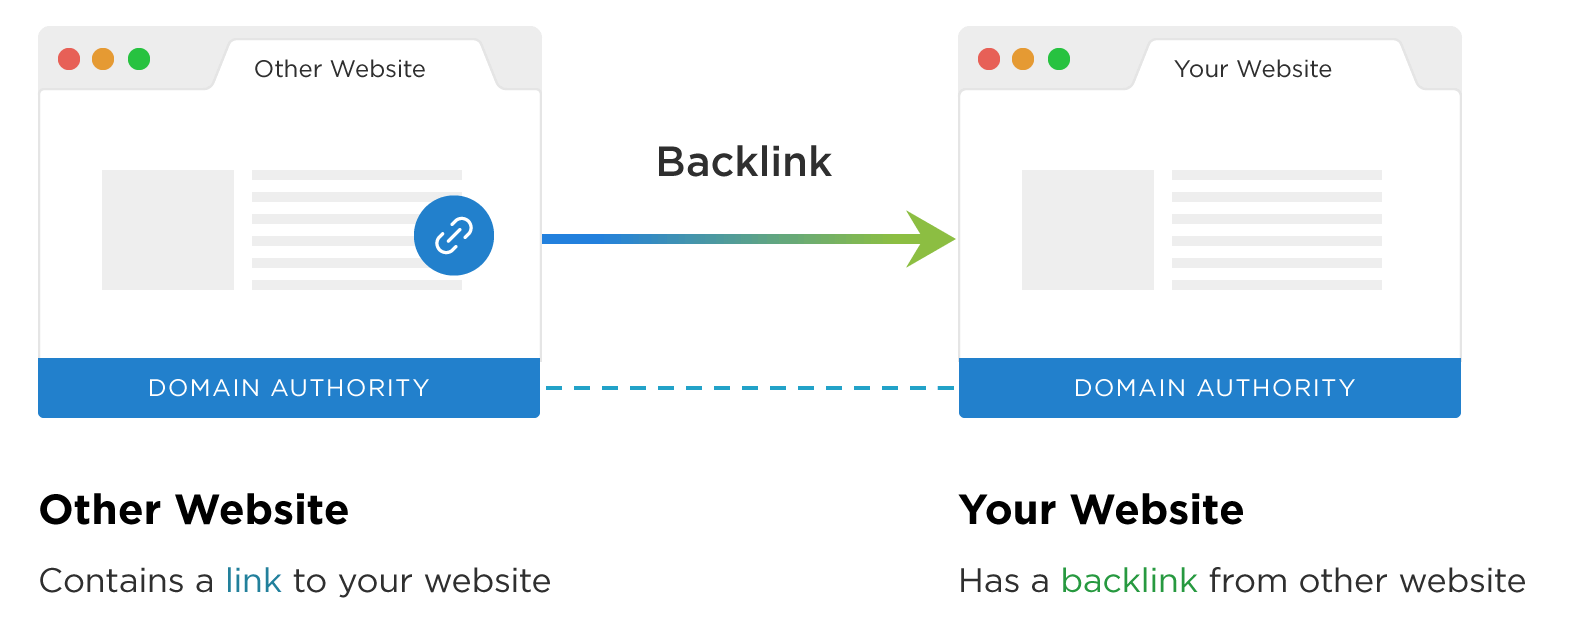 An example of a backlink strategy